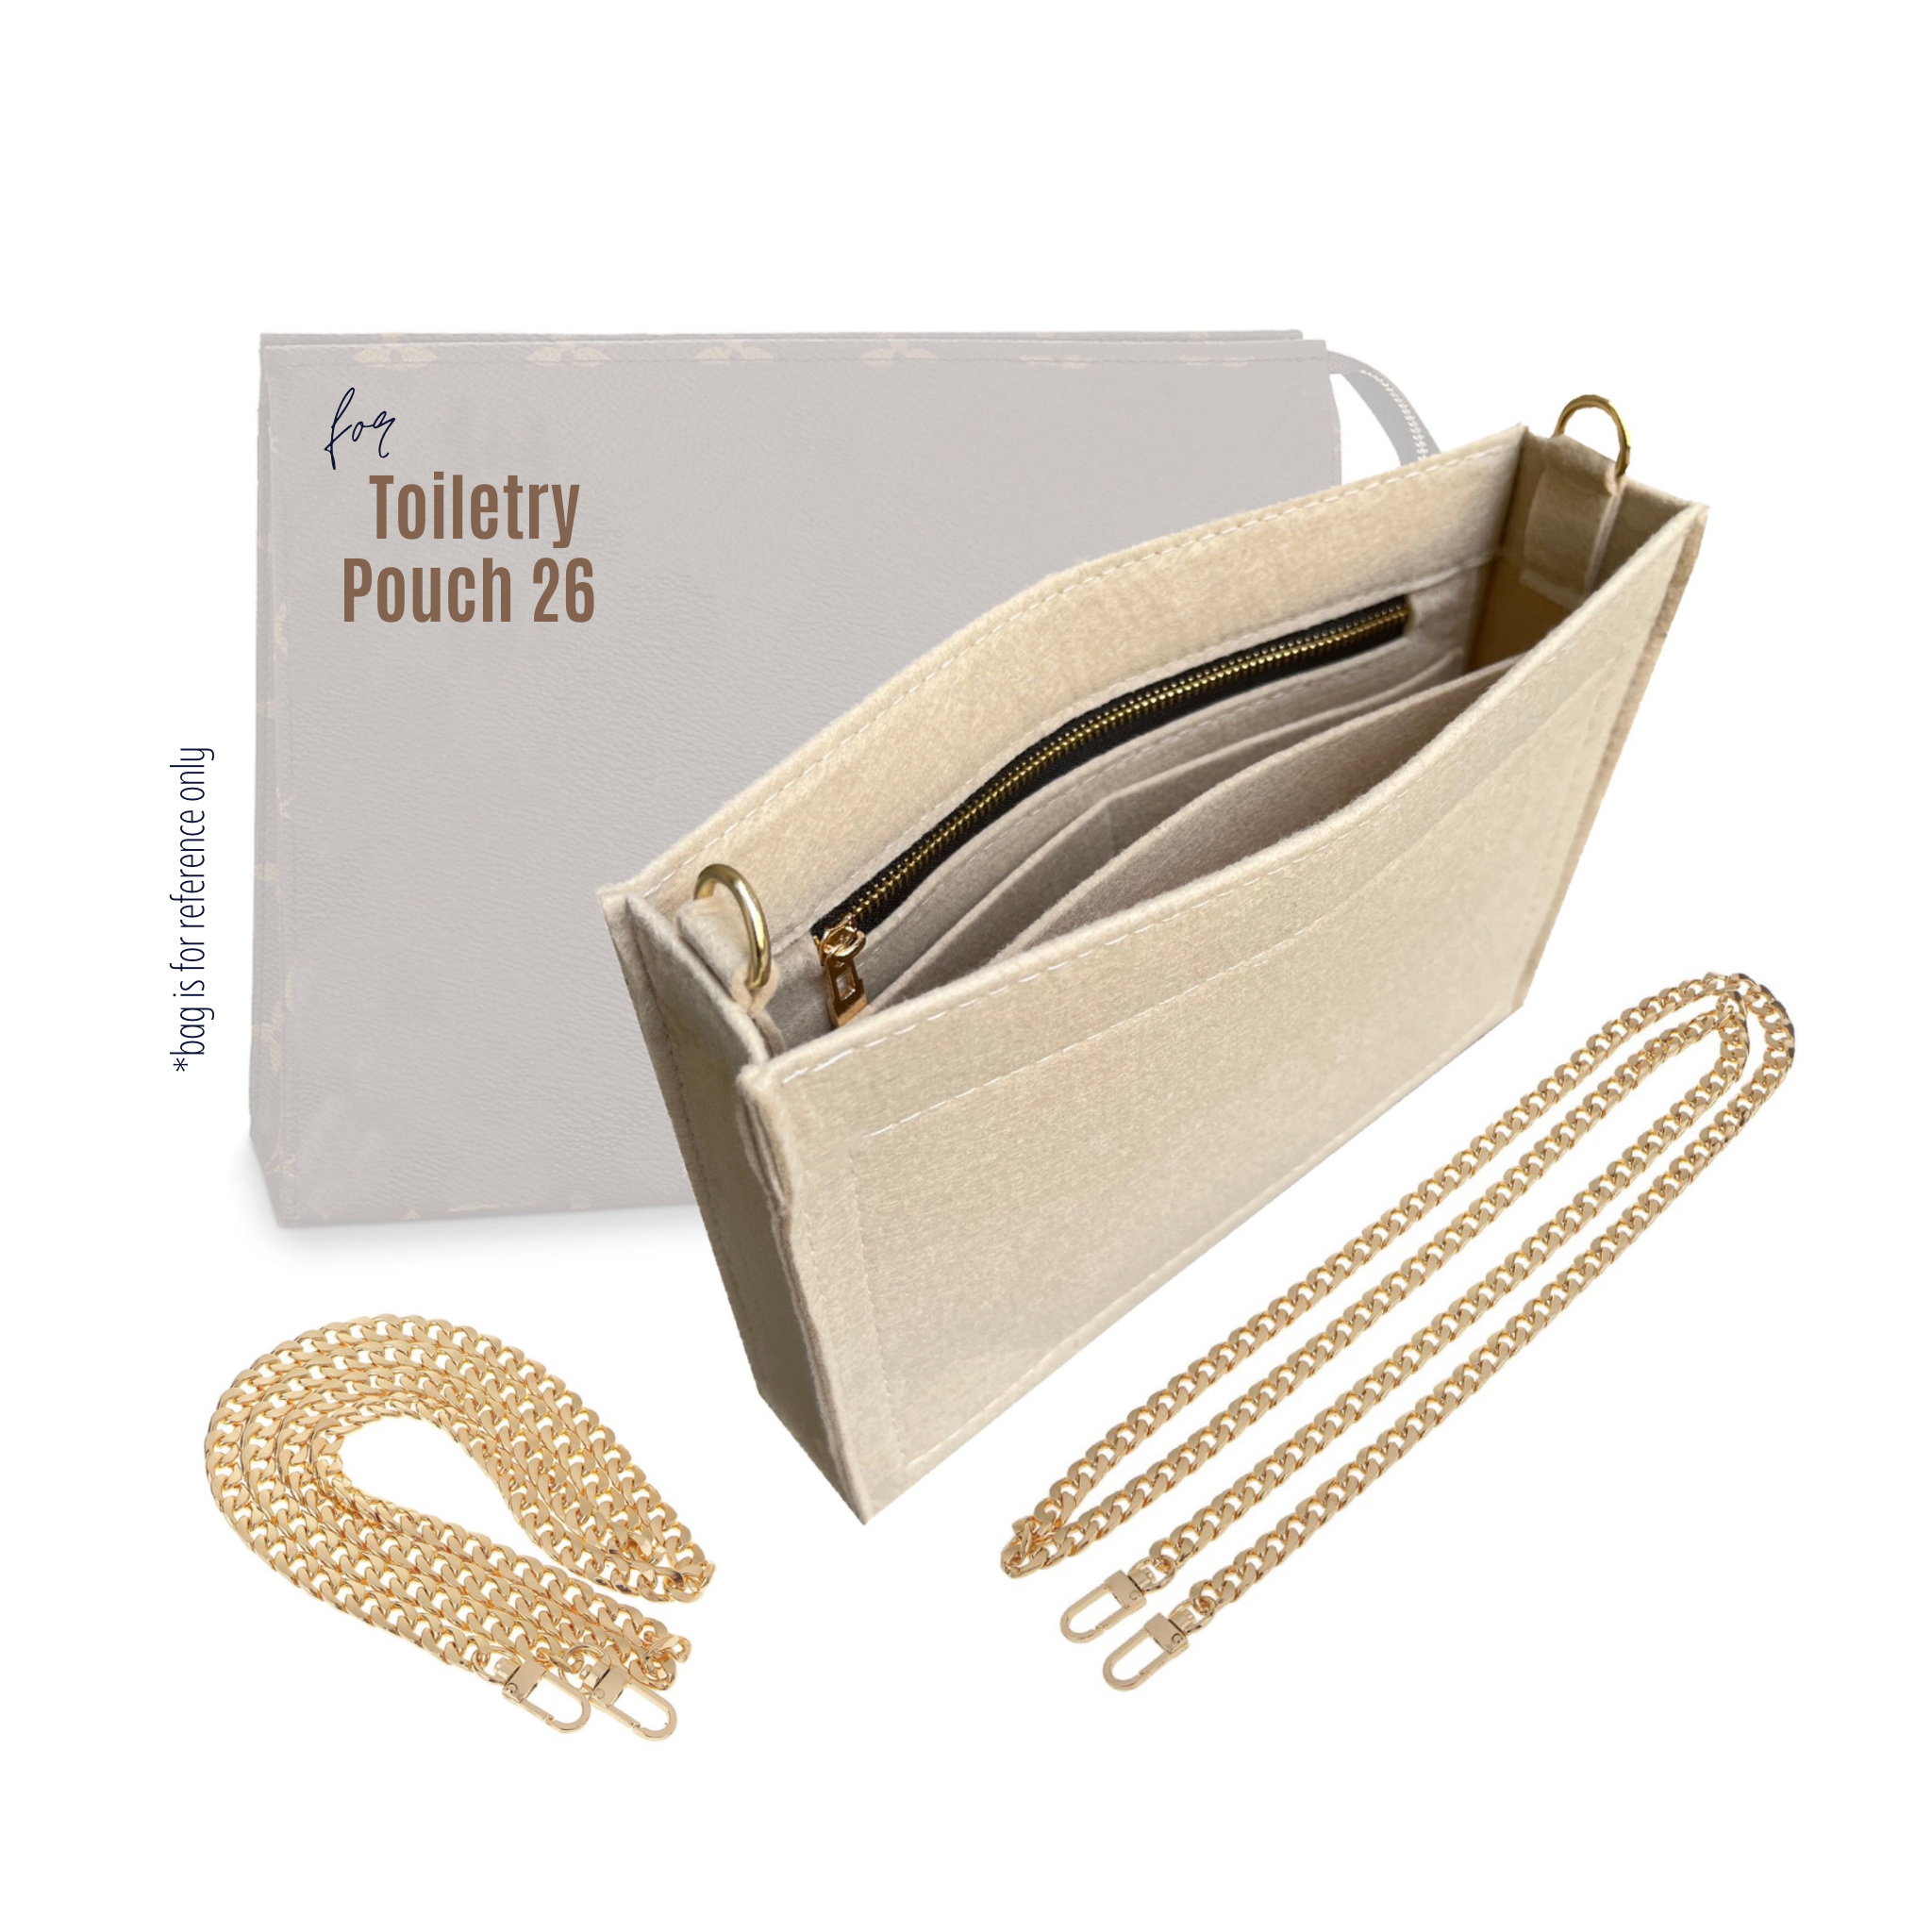  Toiletry pouch 26 Insert with Chain Conversion Kit